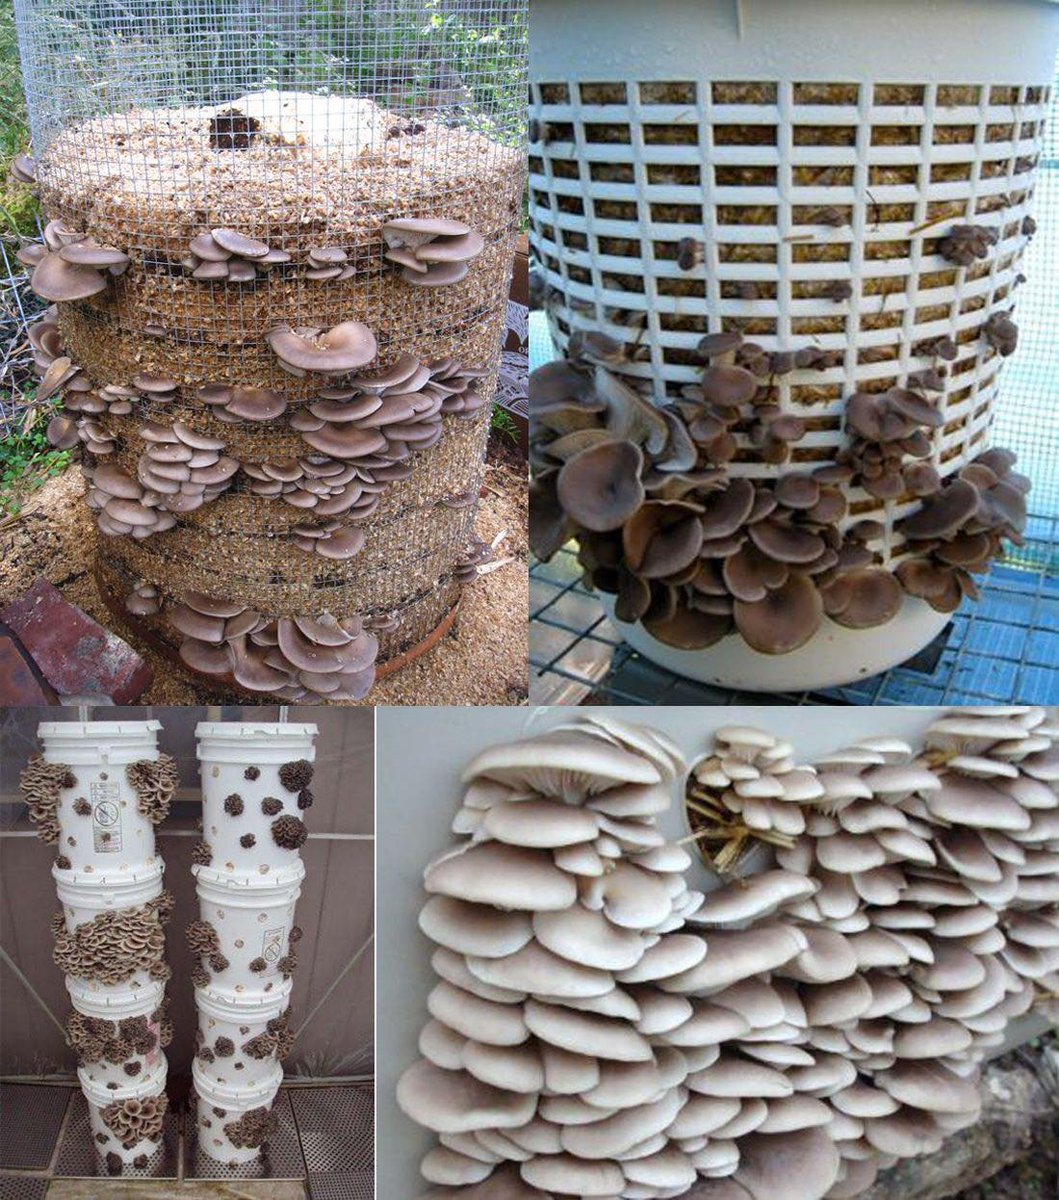 This is How to Build a Mushroom Tower.